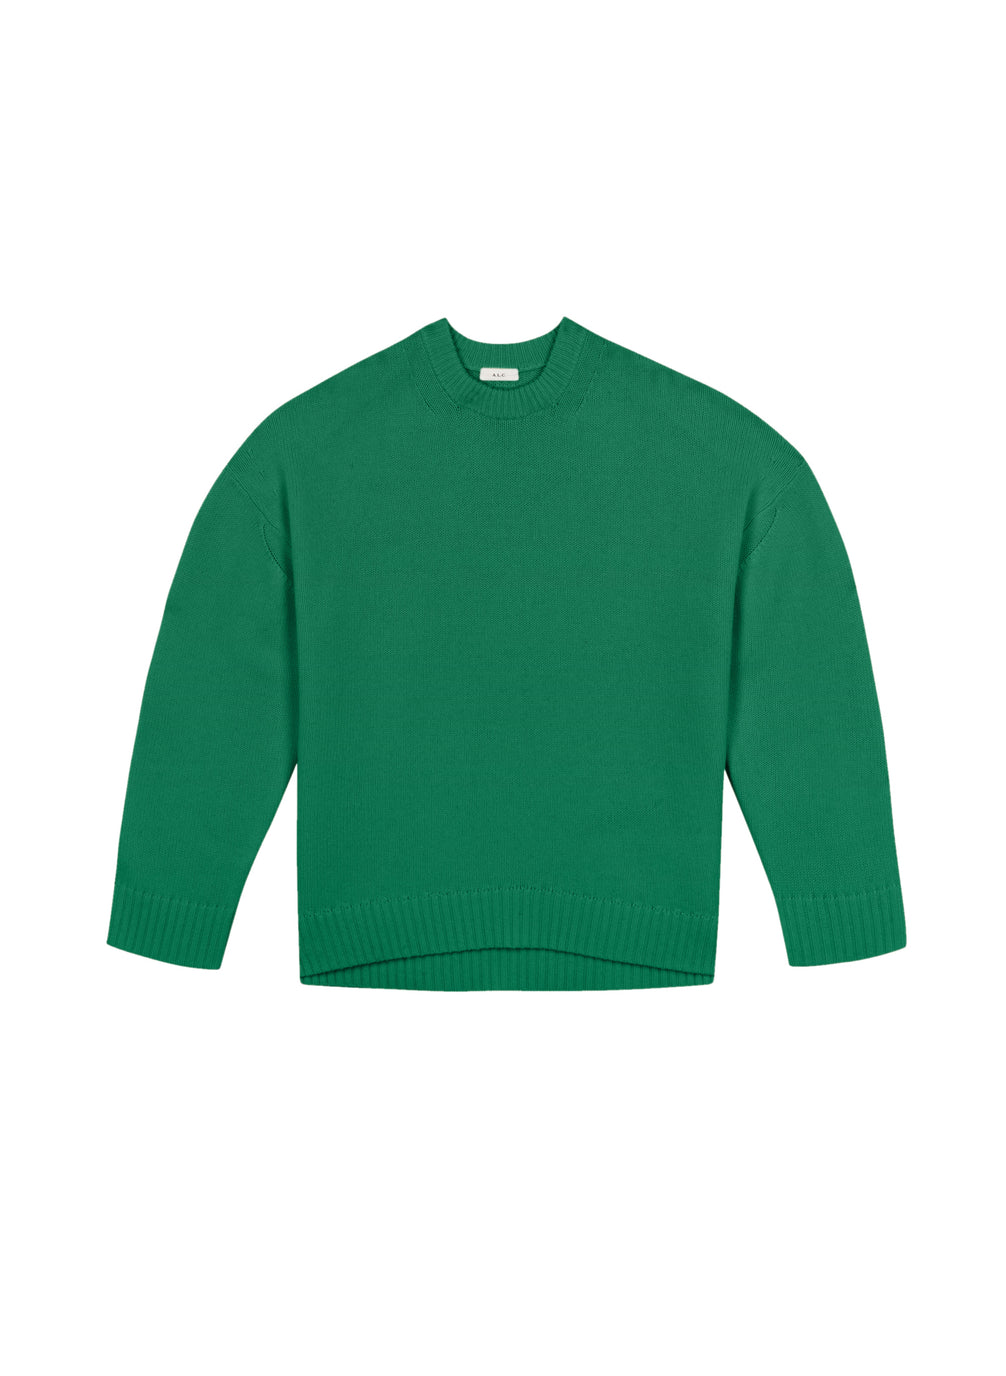 flat lay view of  green cashmere long sleeve sweater